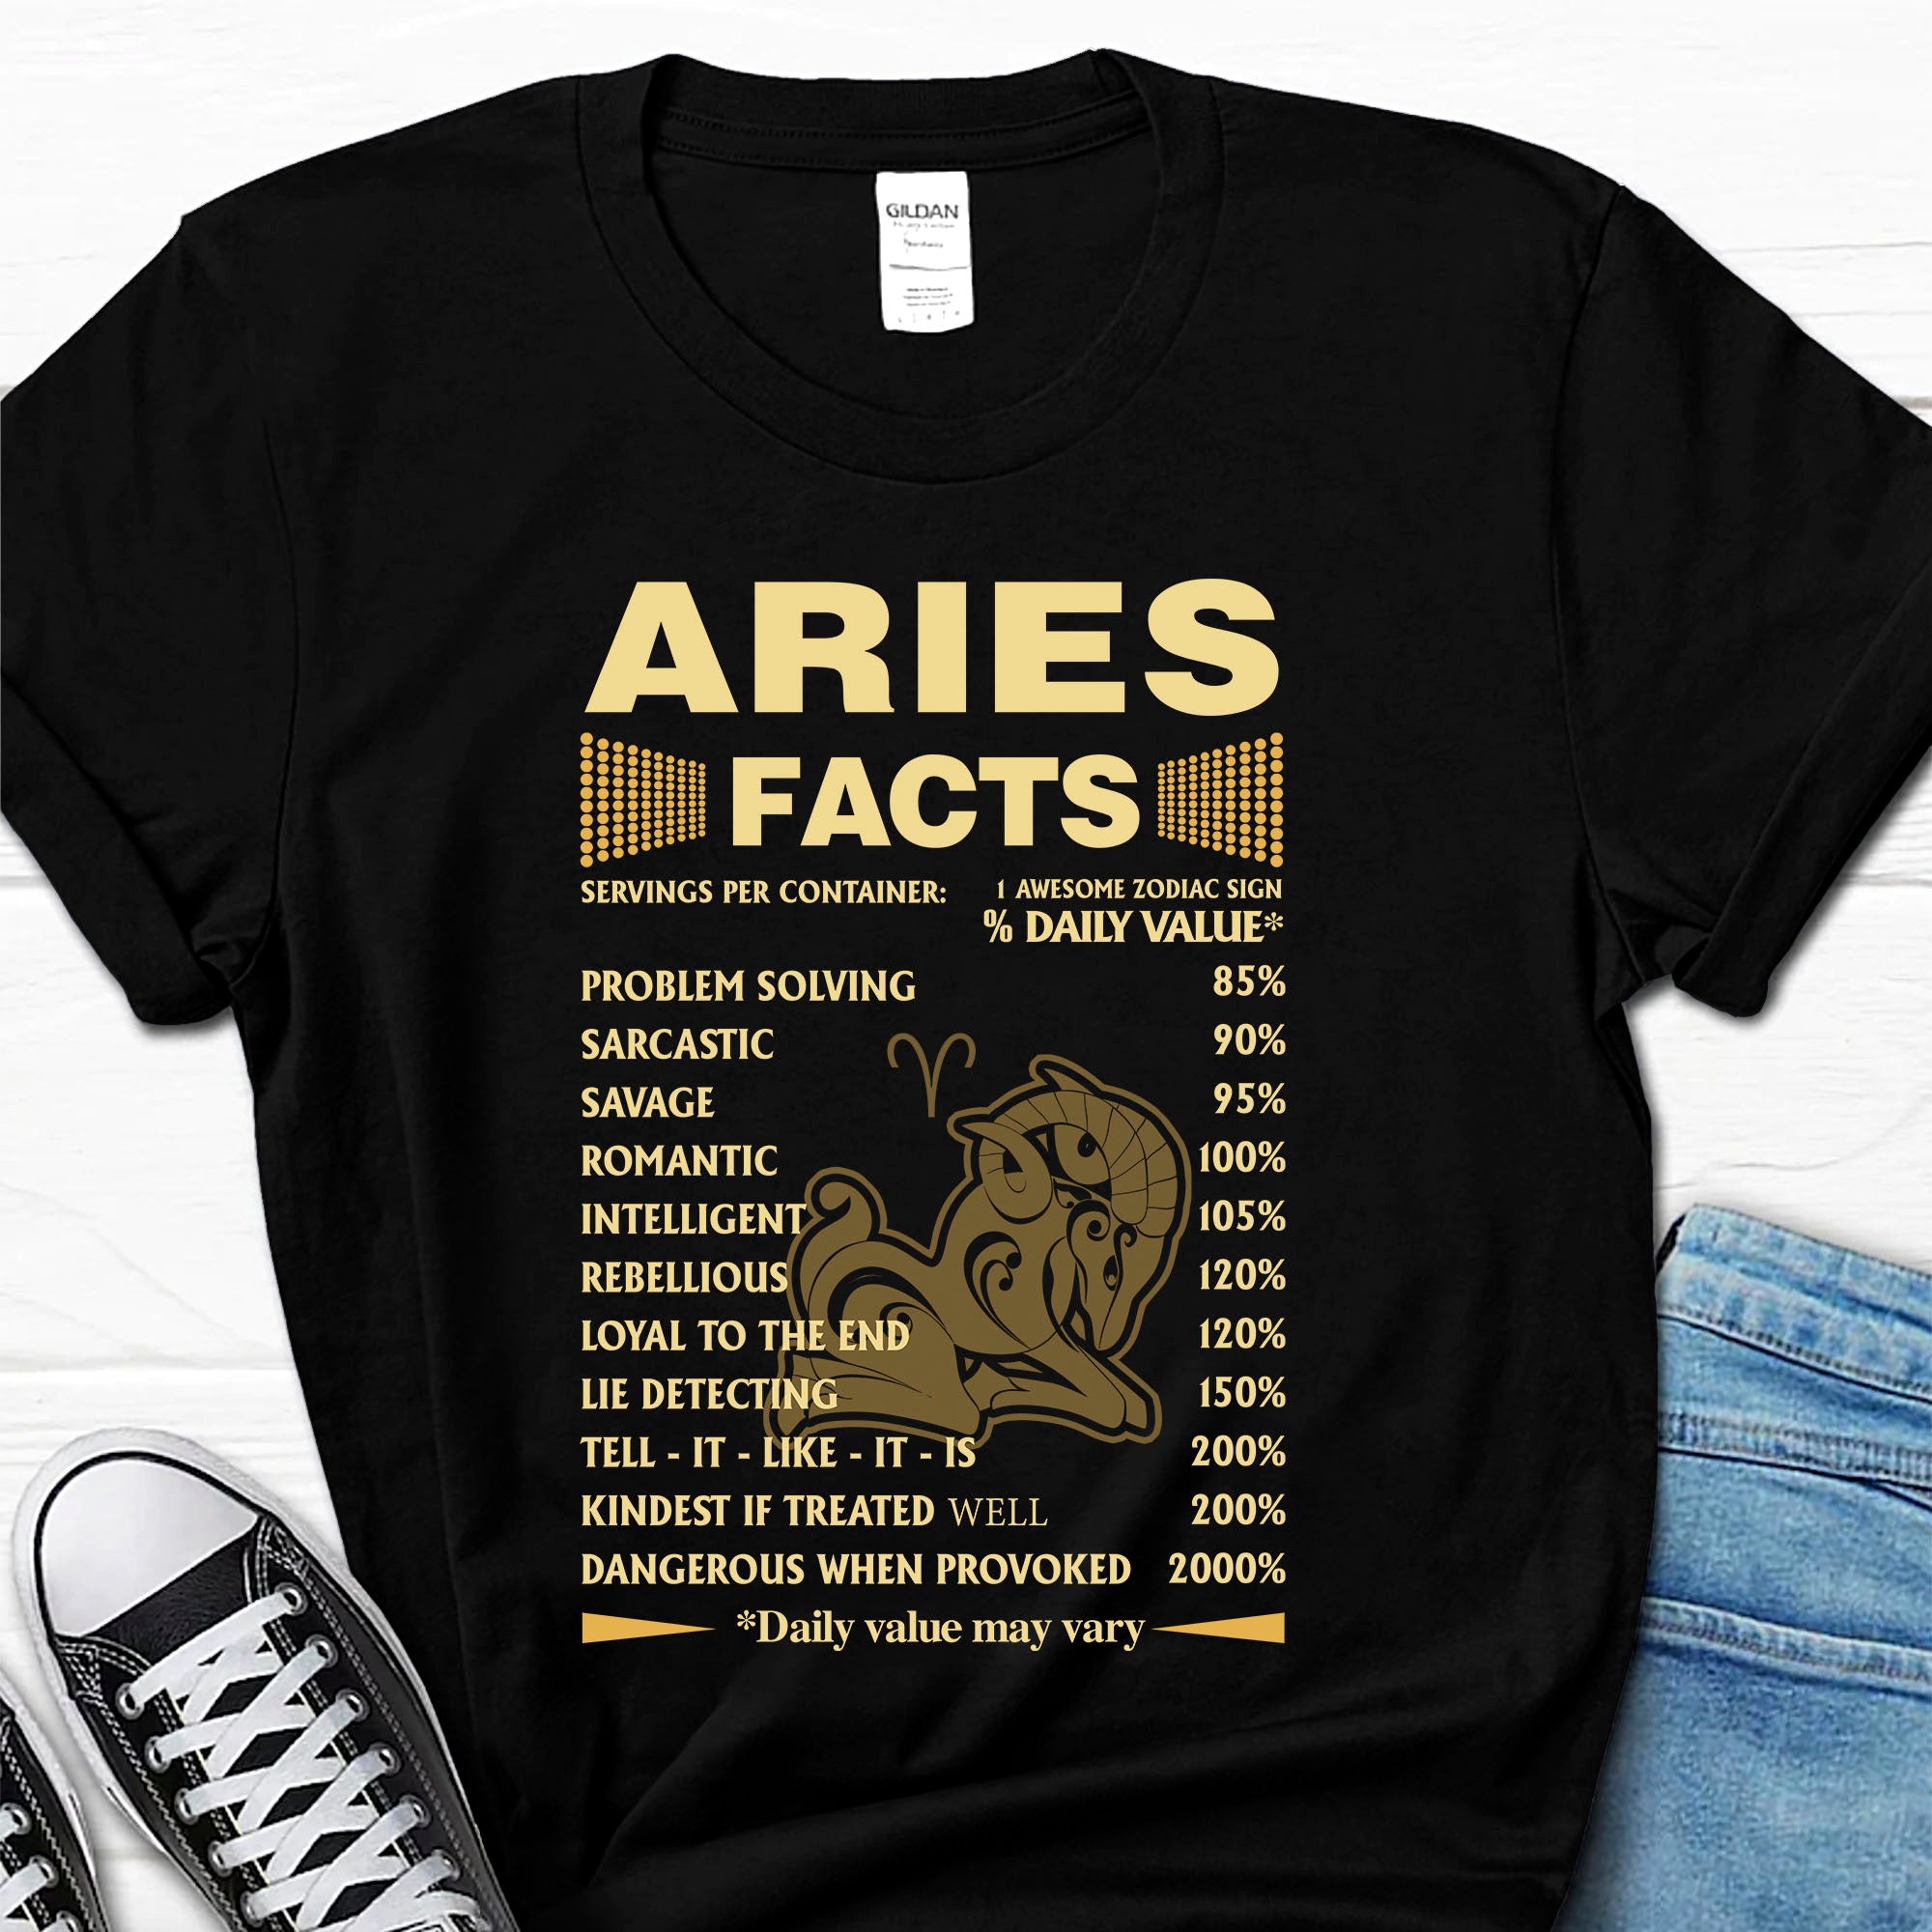 Aries Facts T-shirt